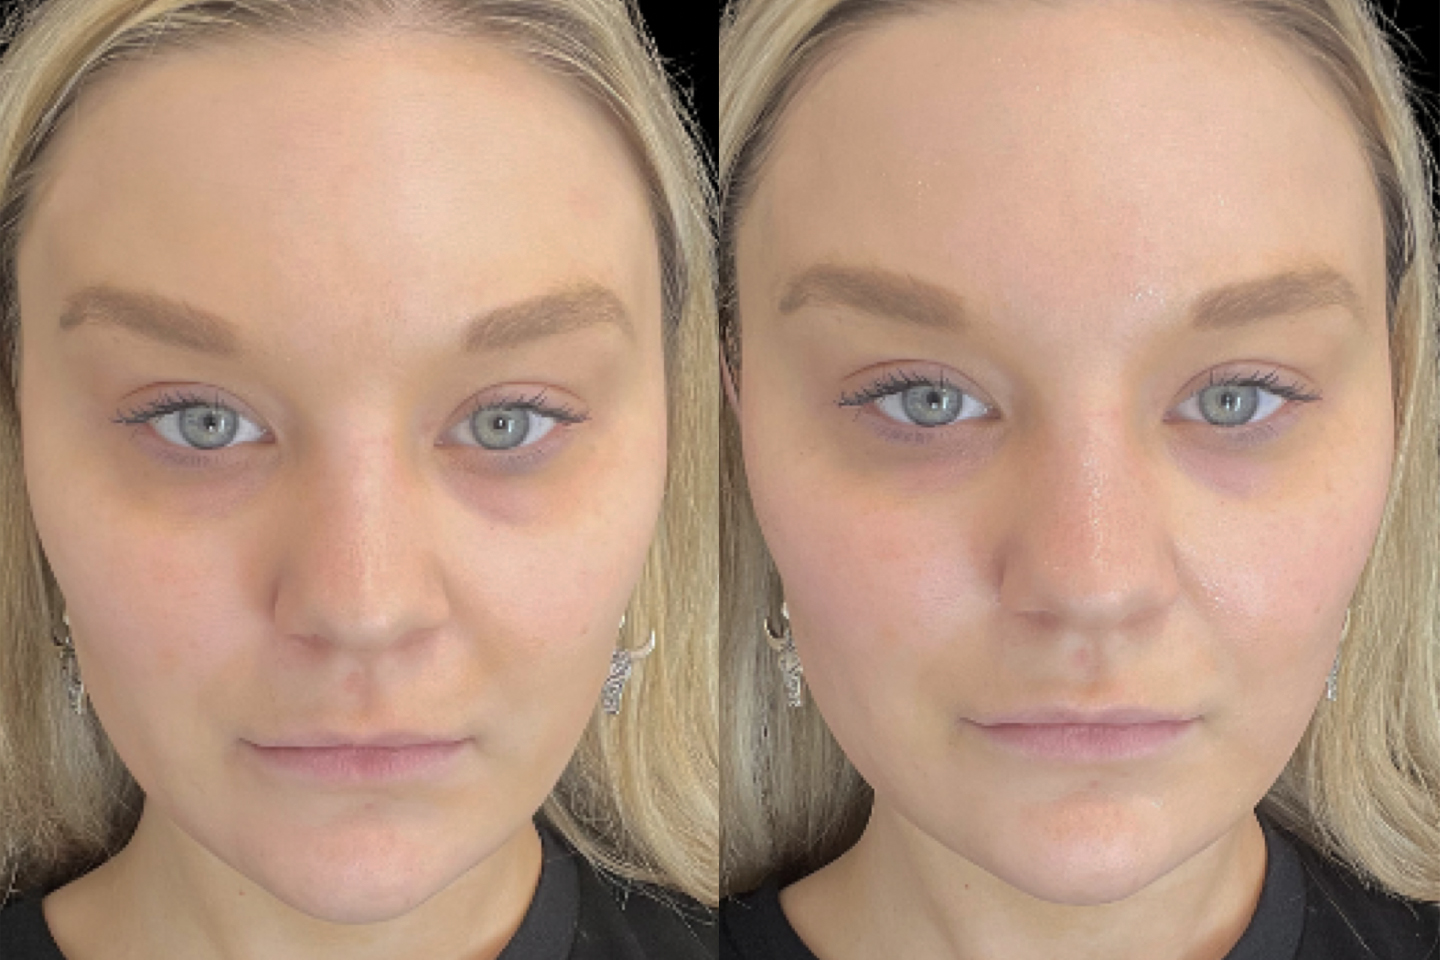 Image of before and immediately post treatment